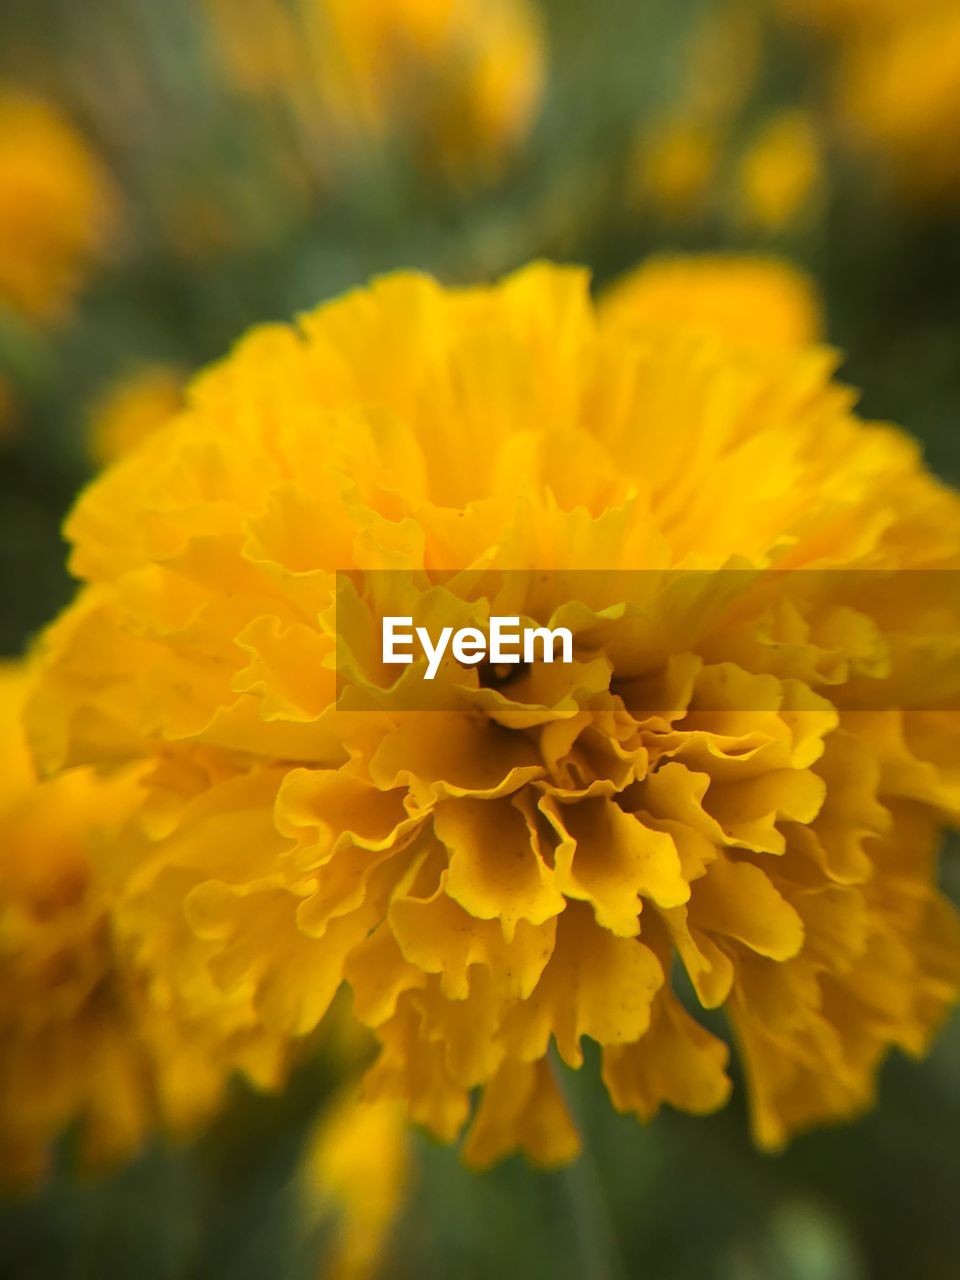 CLOSE-UP OF FRESH YELLOW FLOWER BLOOMING IN NATURE